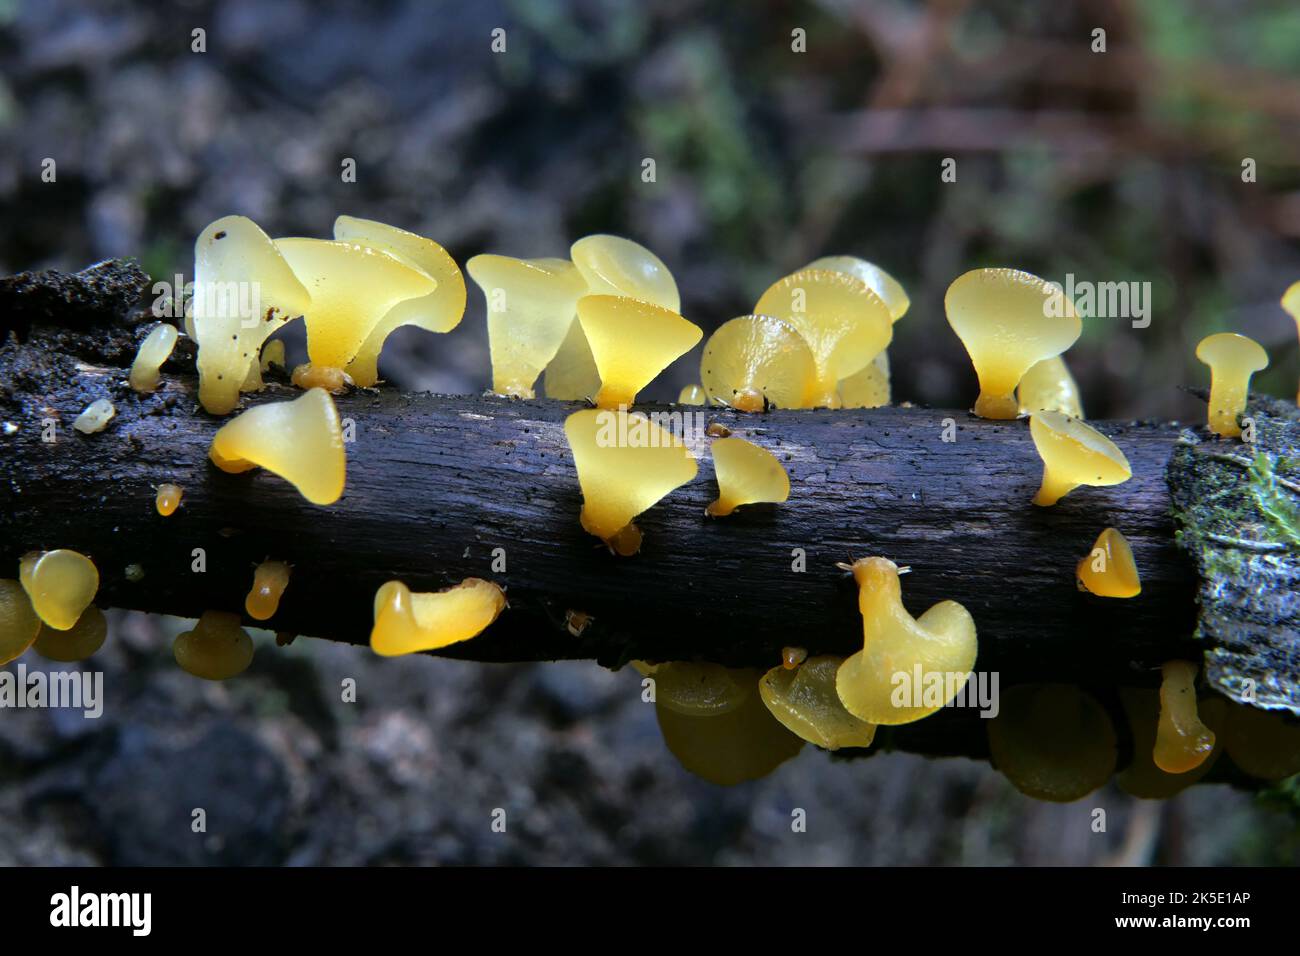 Guepiniopsis alpina, commonly known as the jelly cup, alpine jelly cone, or poor man's gumdrop, is a species of fungus in the family Dacrymycetaceae. The small, gelatinous Fruit bodies are orange and cone or cup shaped. Stock Photo